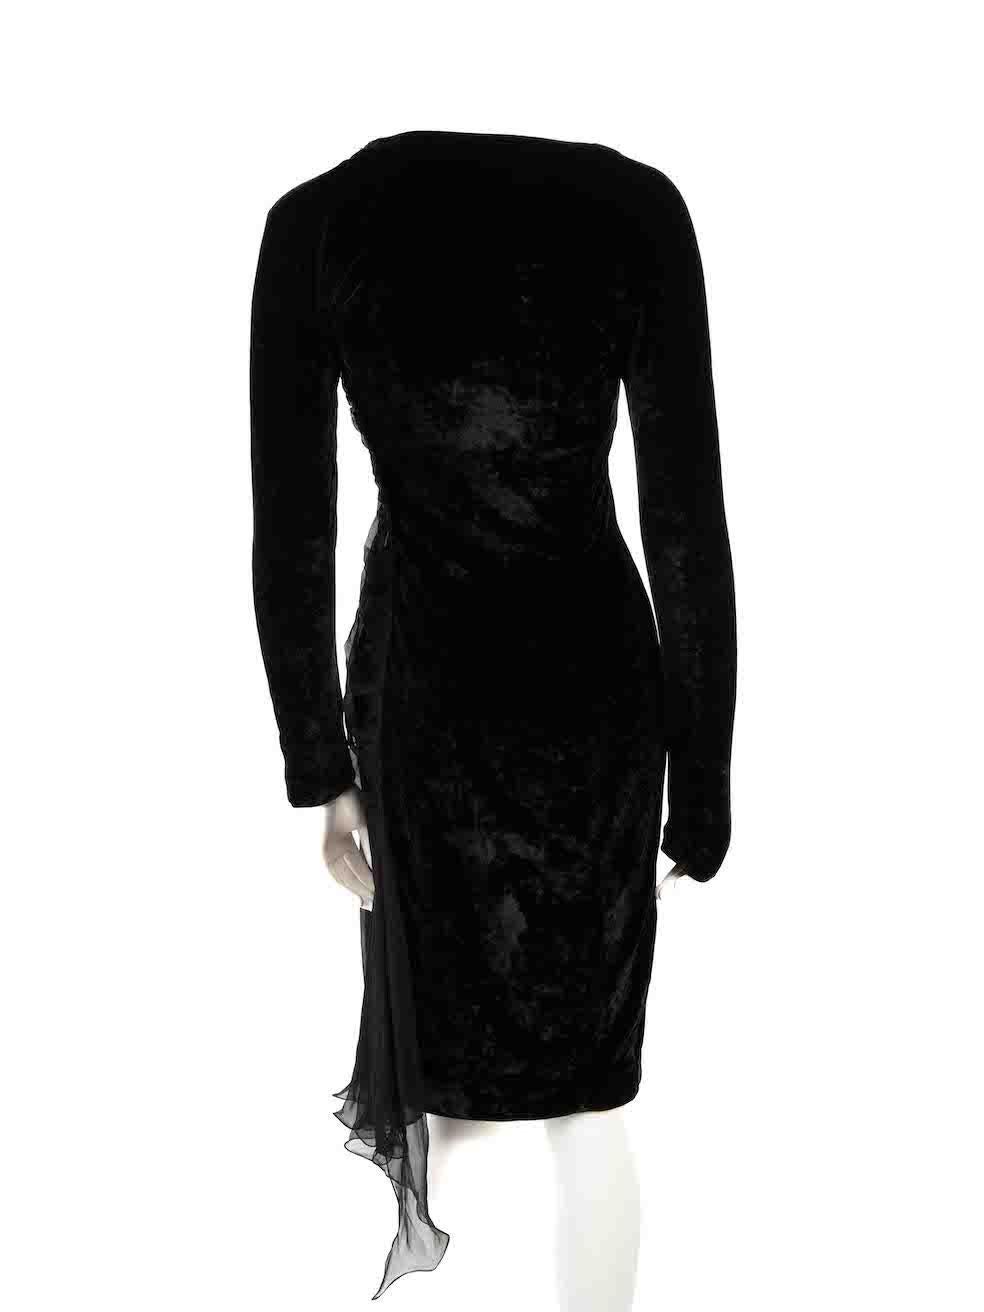 Versace Gianni Versace Vintage Black Velvet Ruched Midi Dress Size L In Good Condition For Sale In London, GB